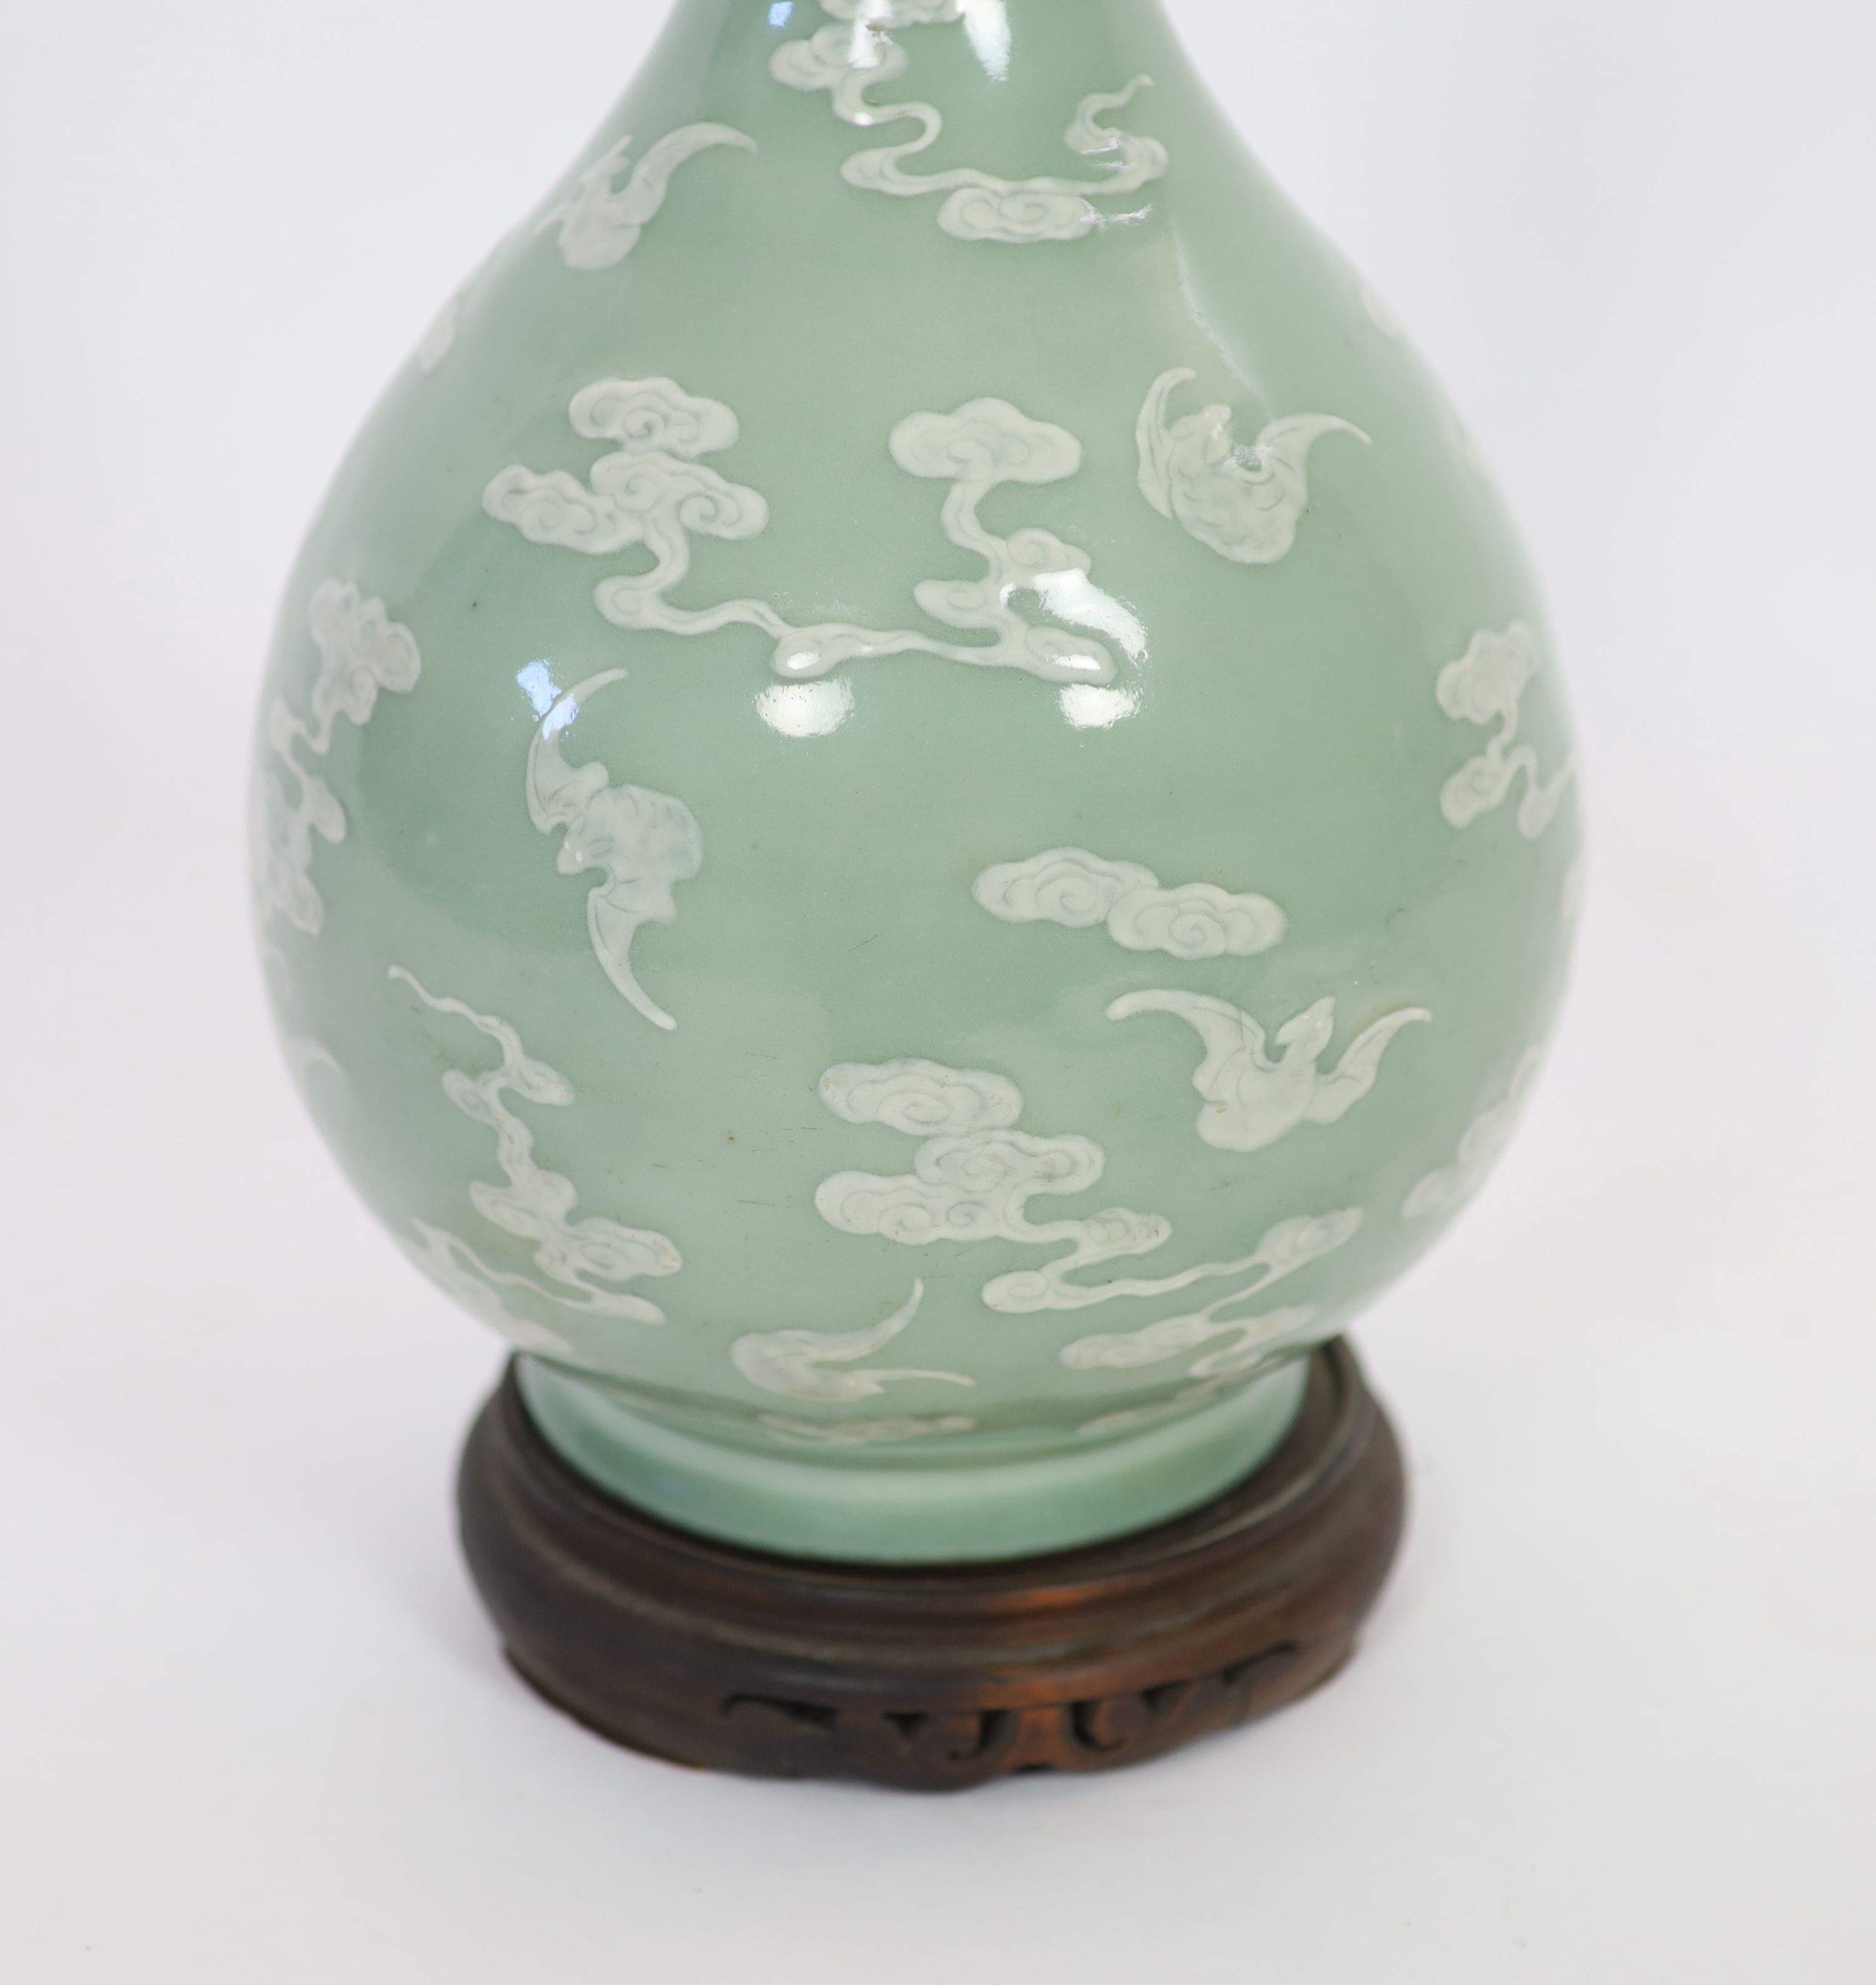 A Chinese celadon-glazed slip-decorated bottle vase, Qianlong seal mark and period (1736-95), Formerly mounted as a lamp with drilled hole through the seal mark and base.